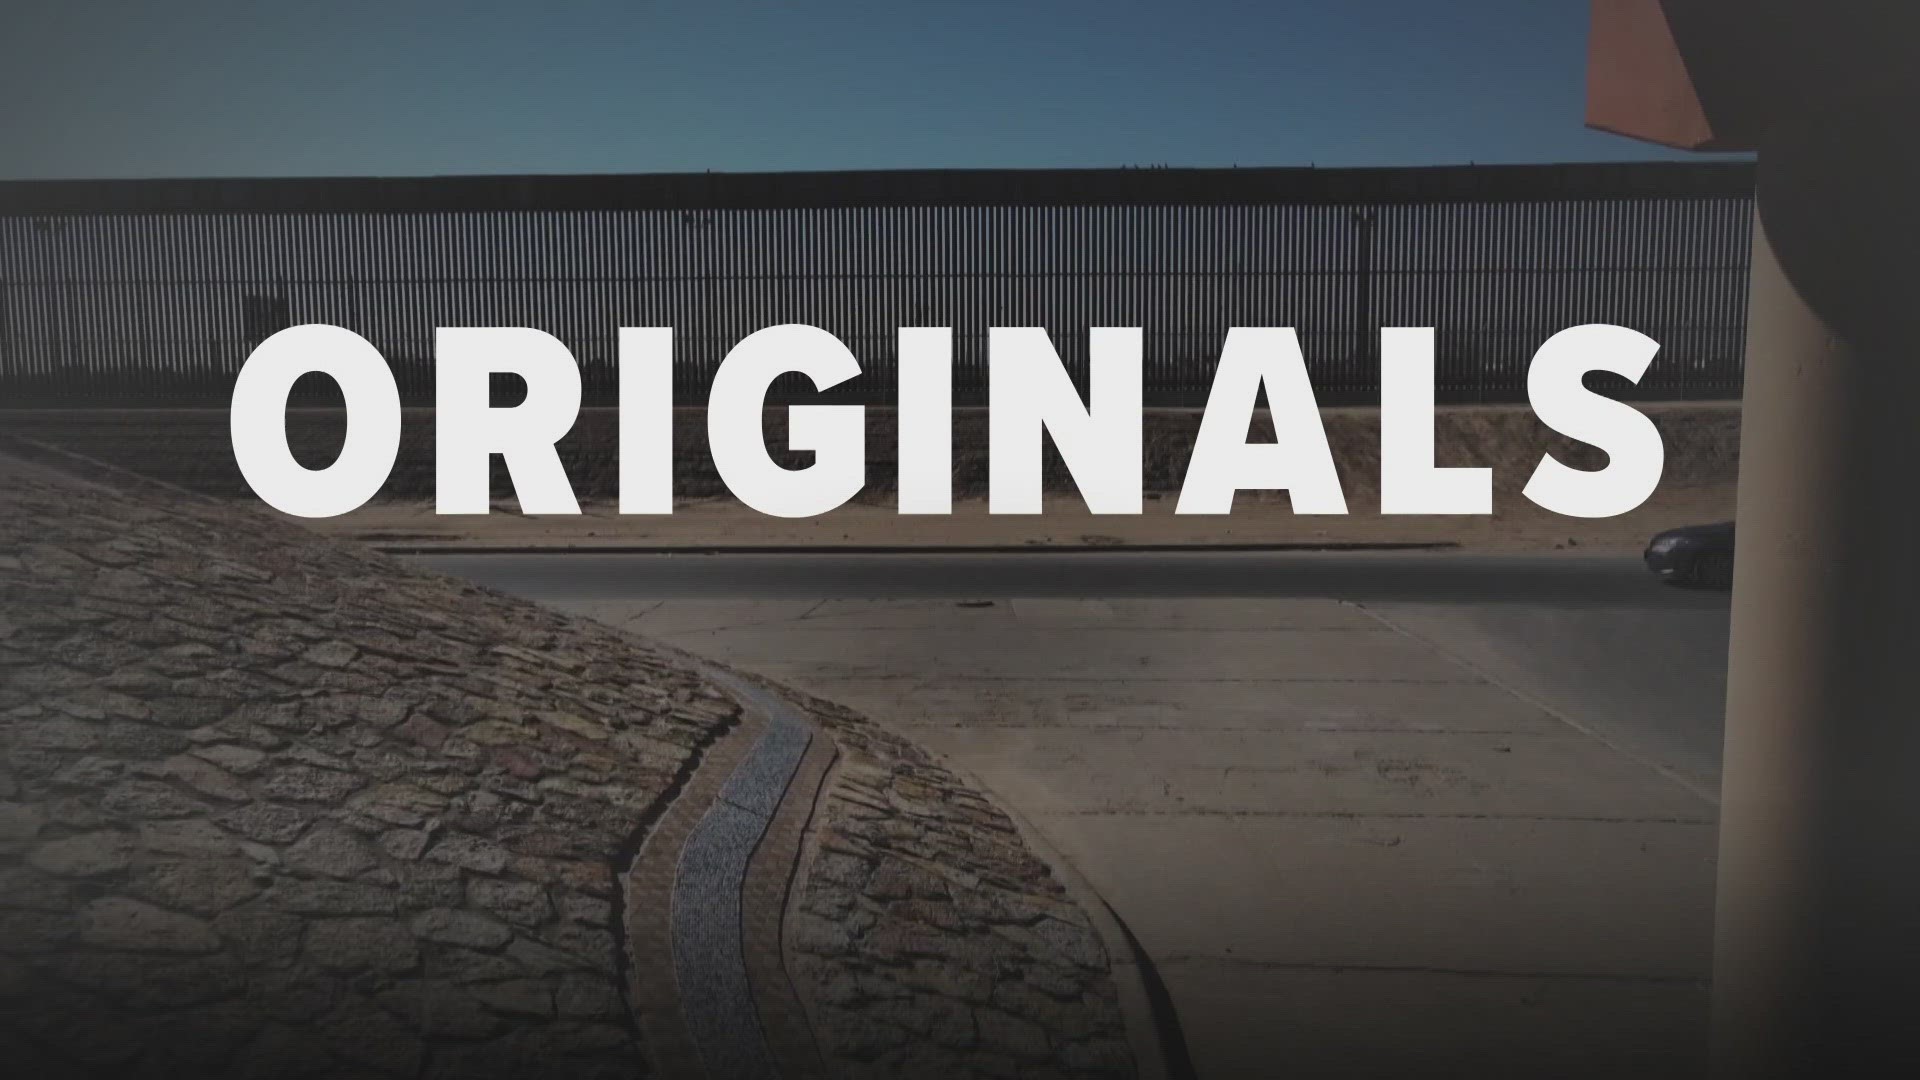 The 9NEWS ORIGINALS team is dedicated to telling stories you haven’t heard before in a way you’ve never seen.